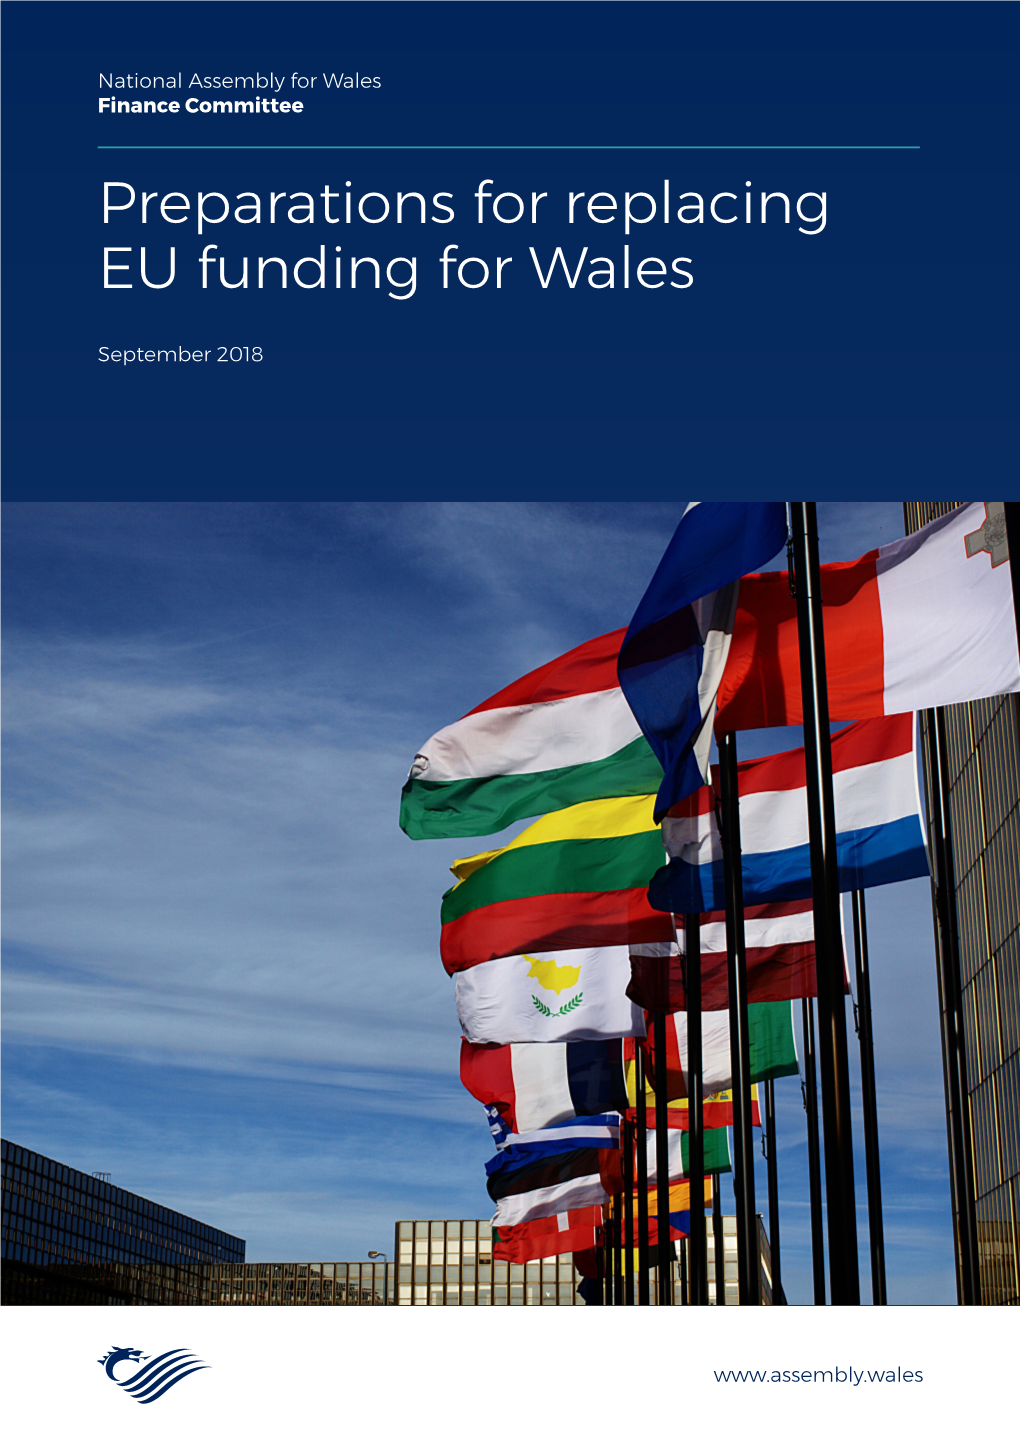 Preparations for Replacing EU Funding for Wales